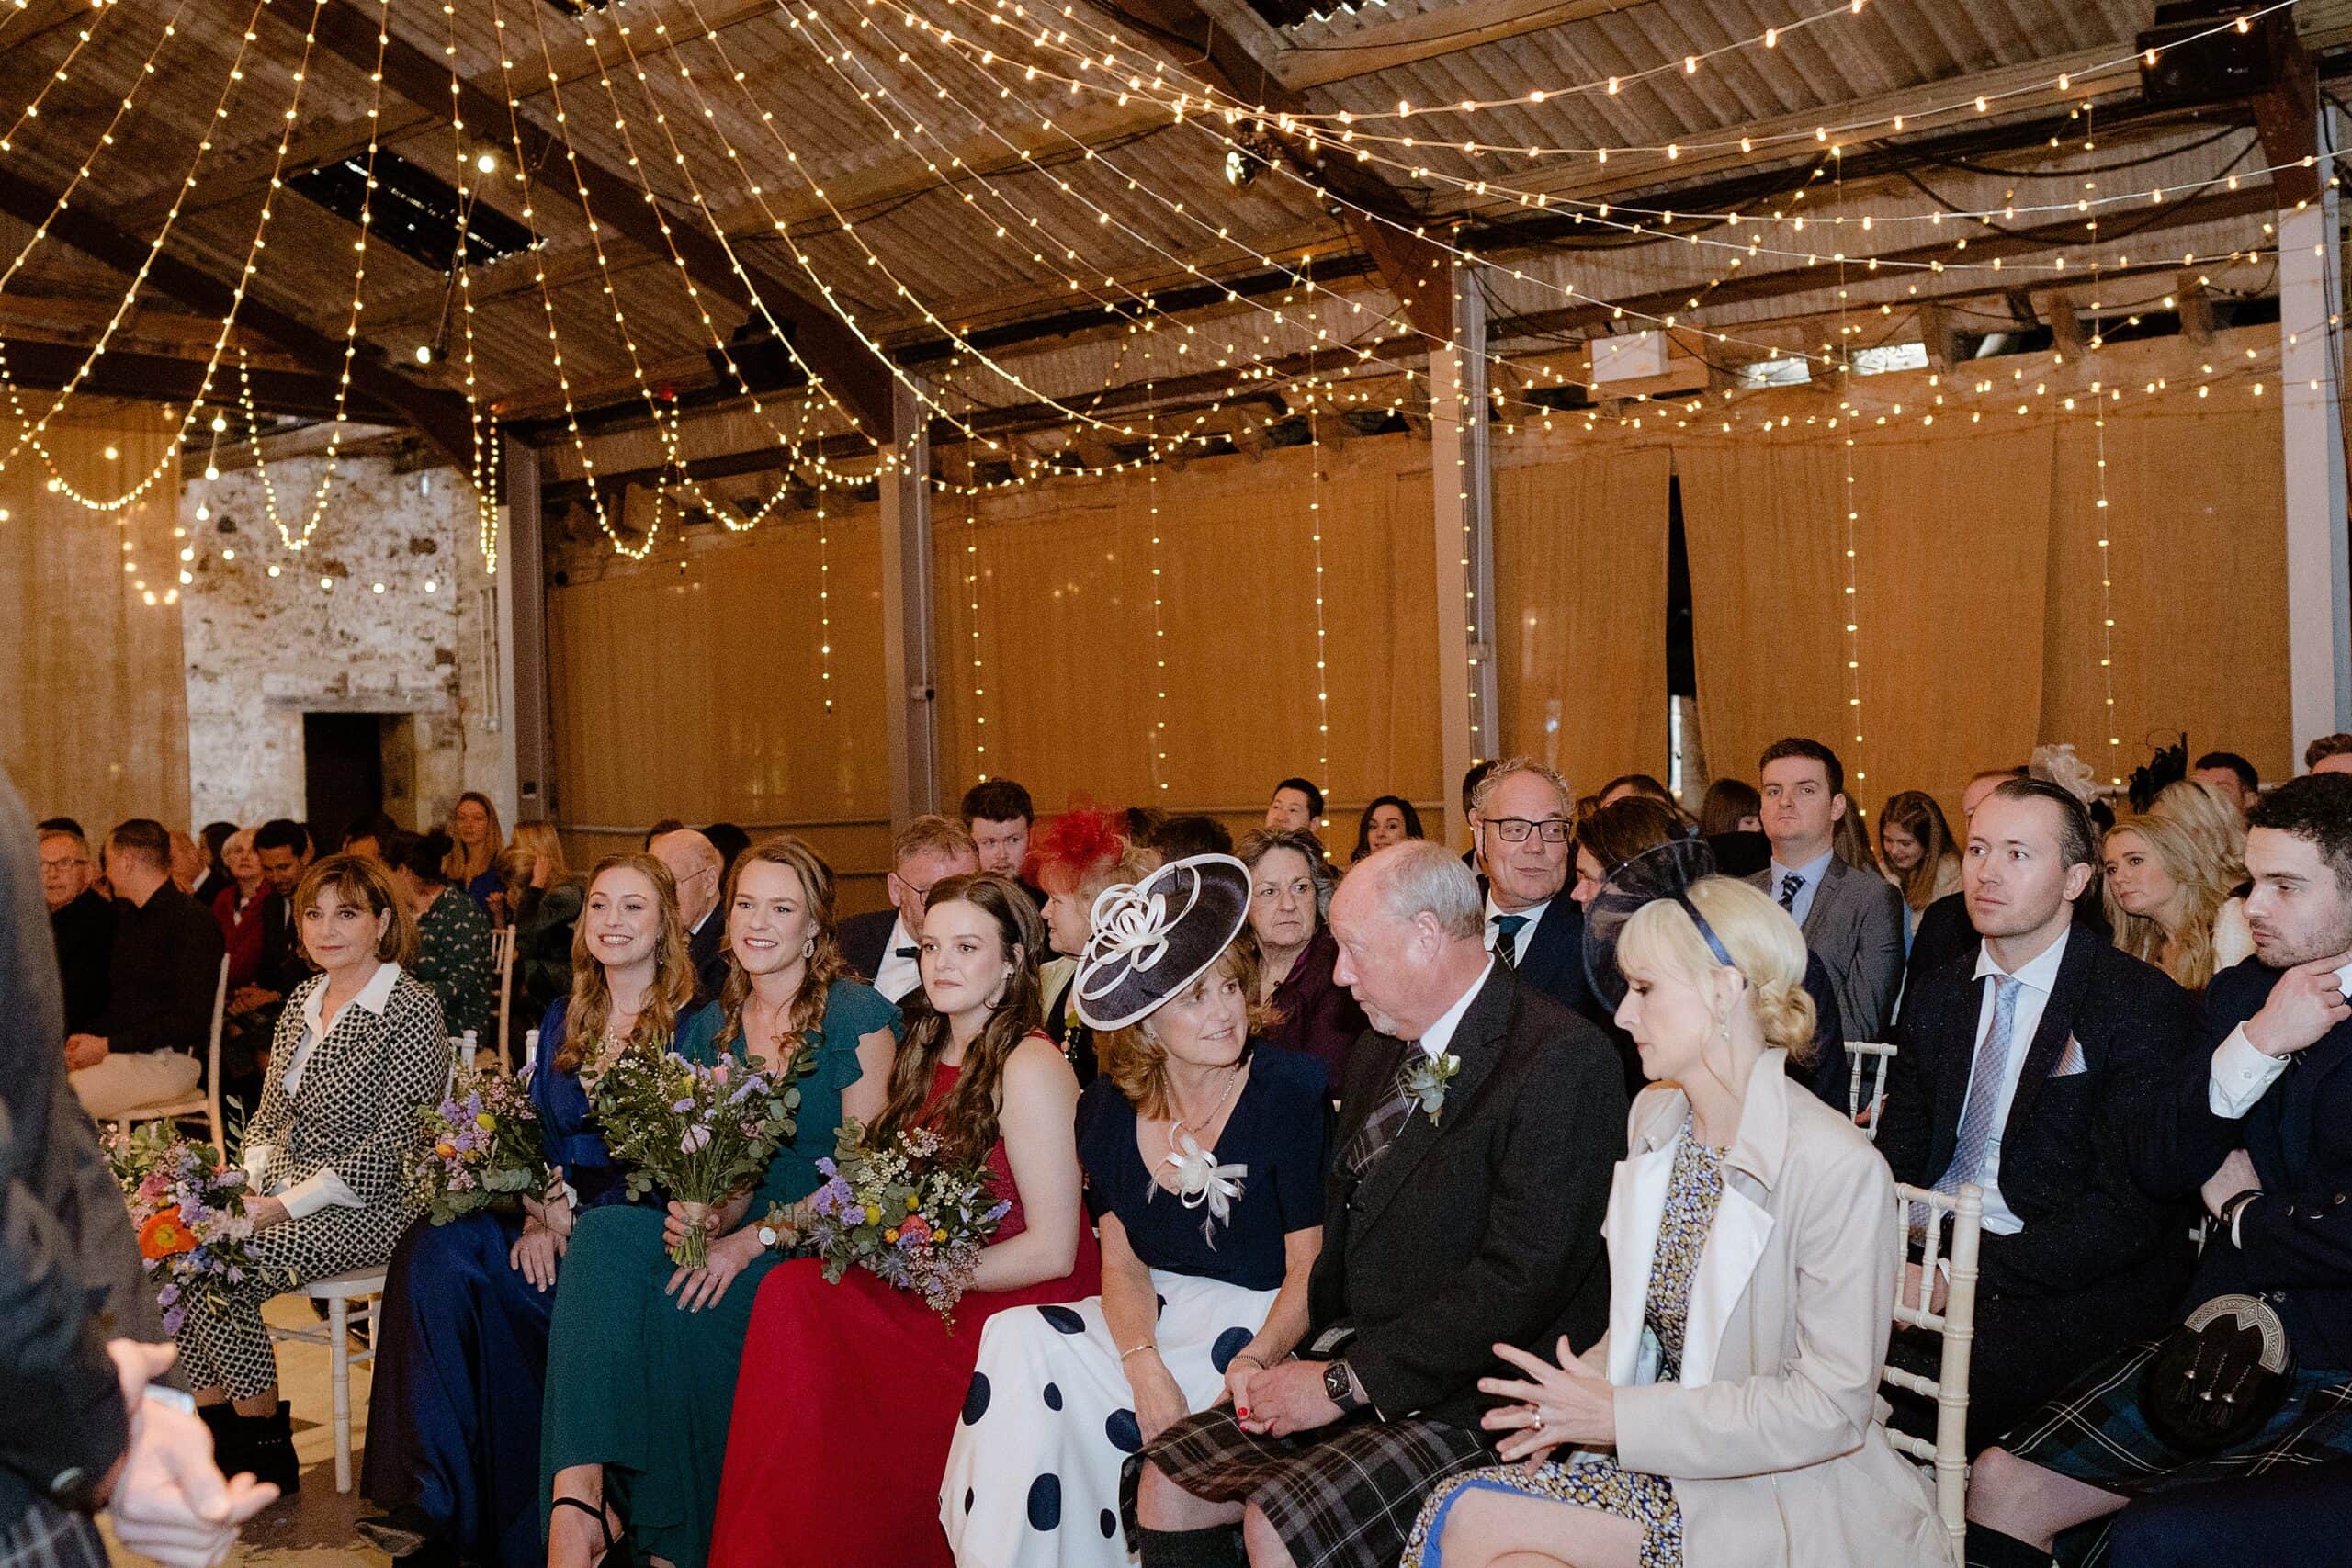 guests seated beneath festoon lights during wedding ceremony at a barn wedding venue in scotland